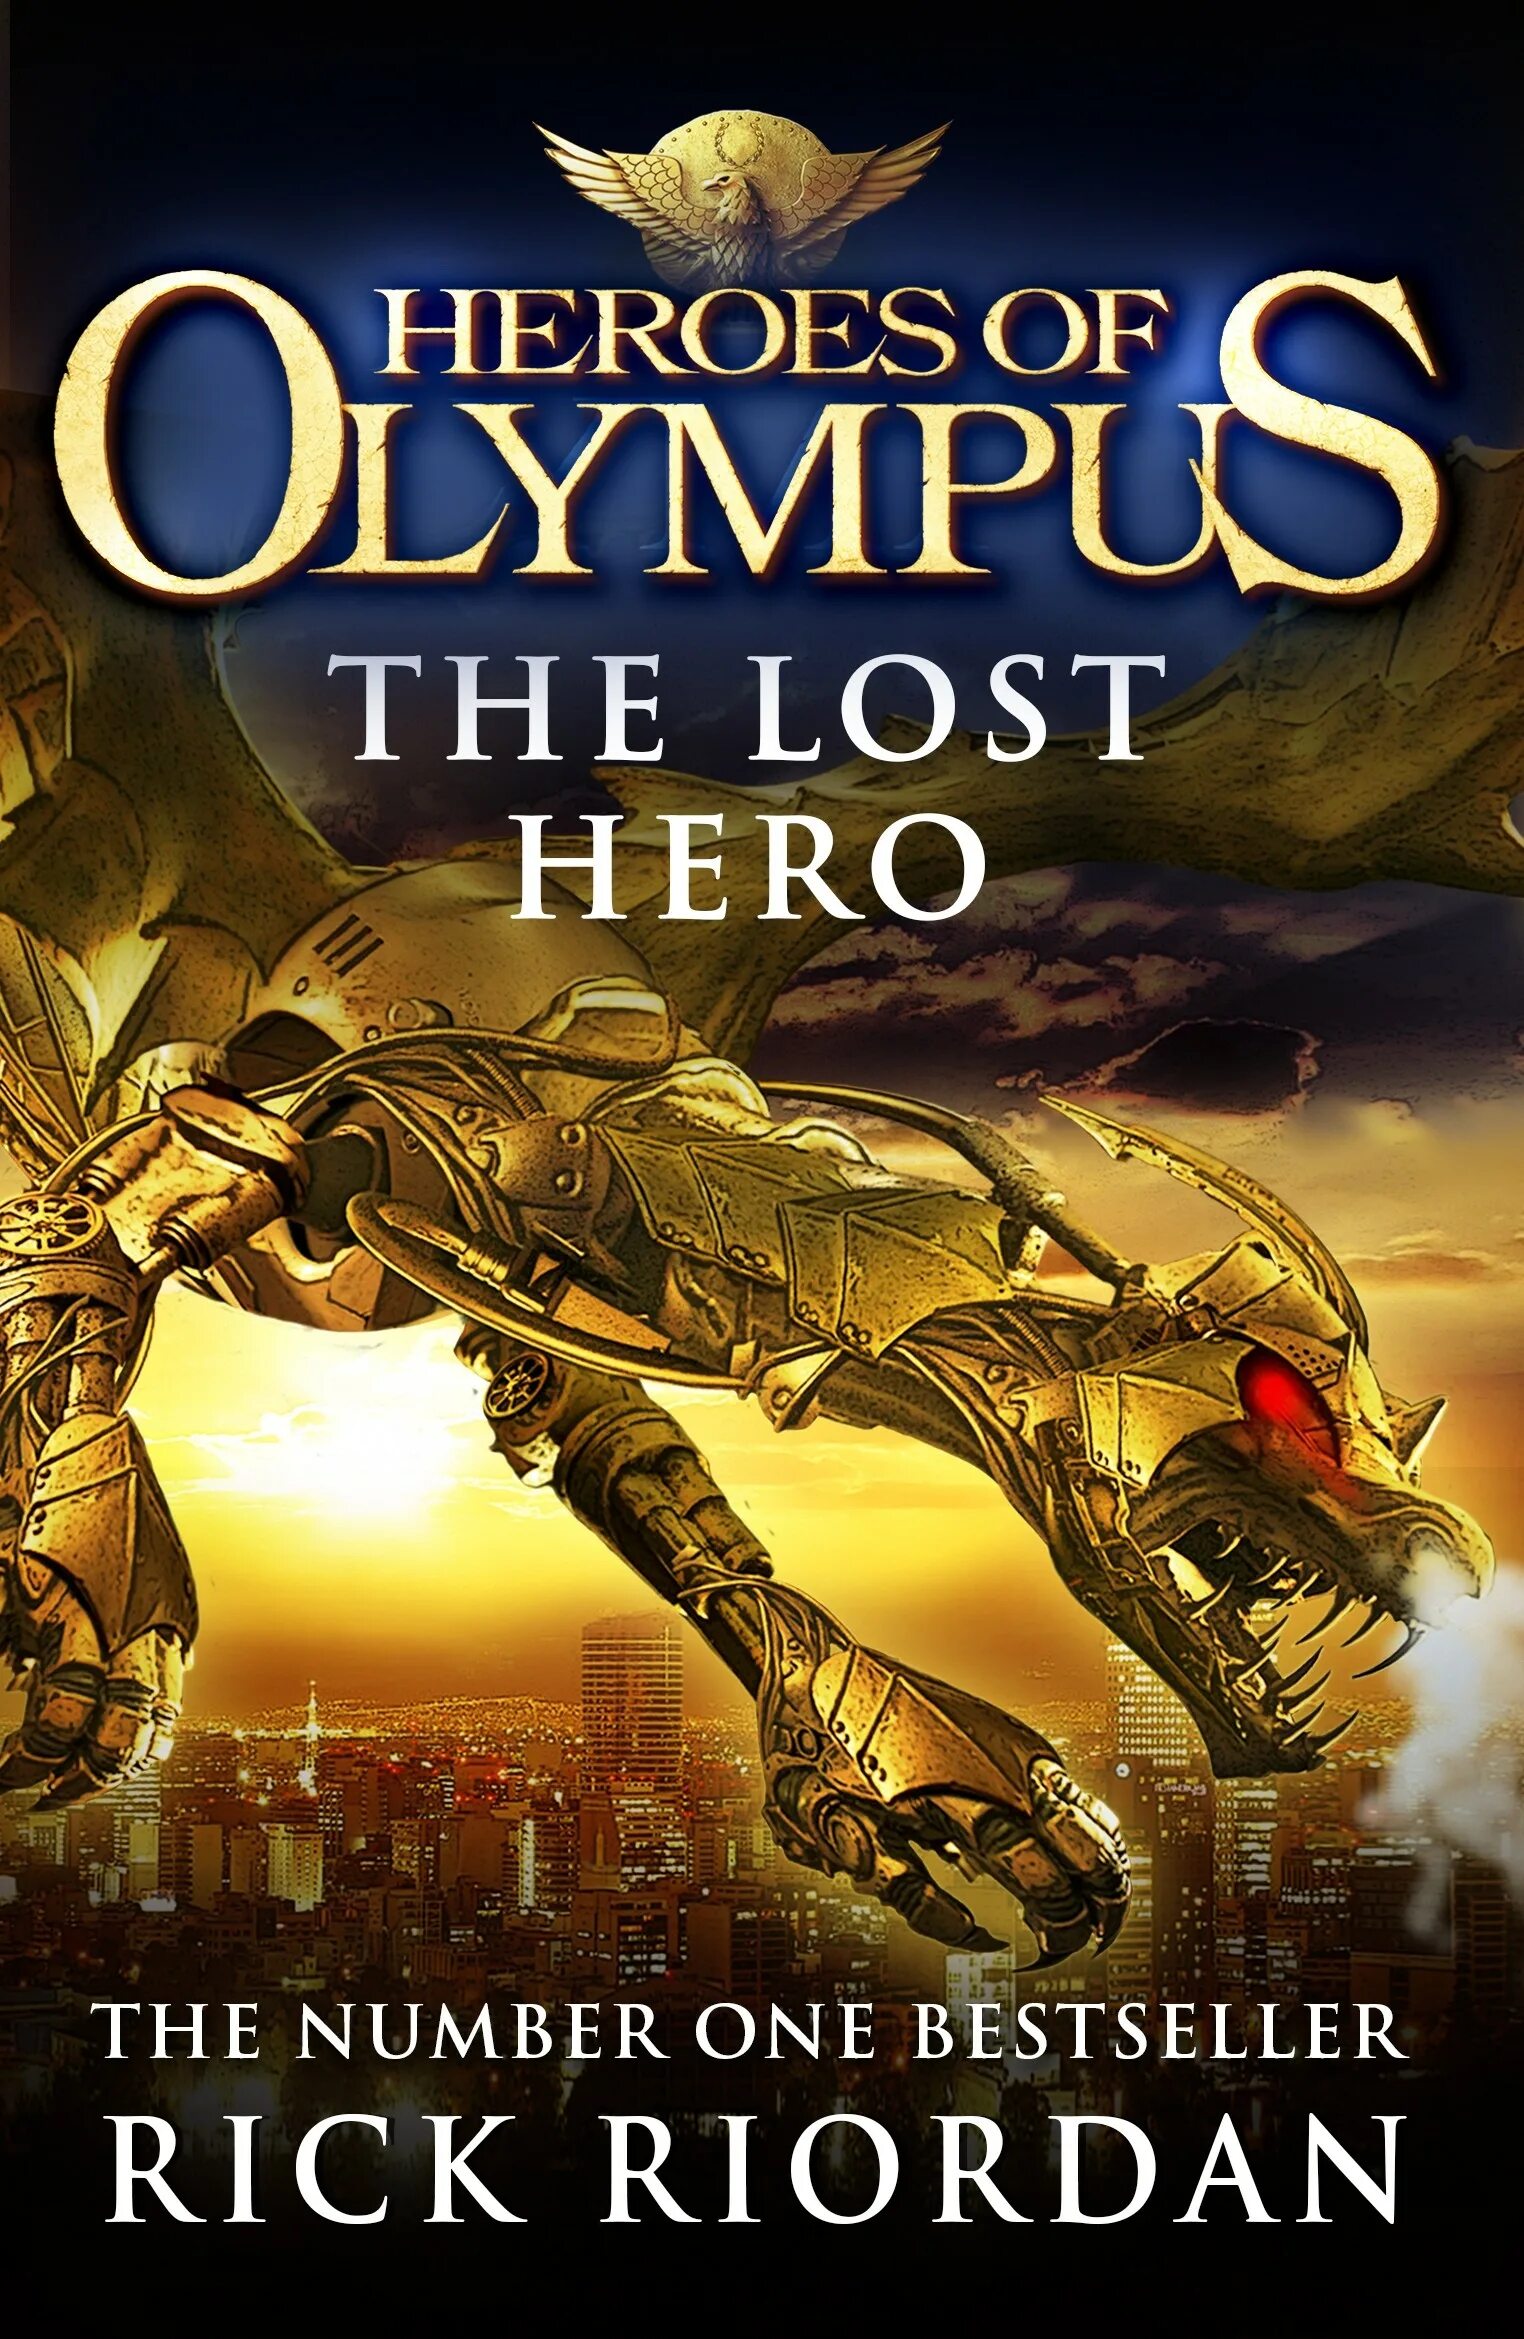 The Lost Hero book. Book of Heroes герои. Олимпус герой. The lost hero